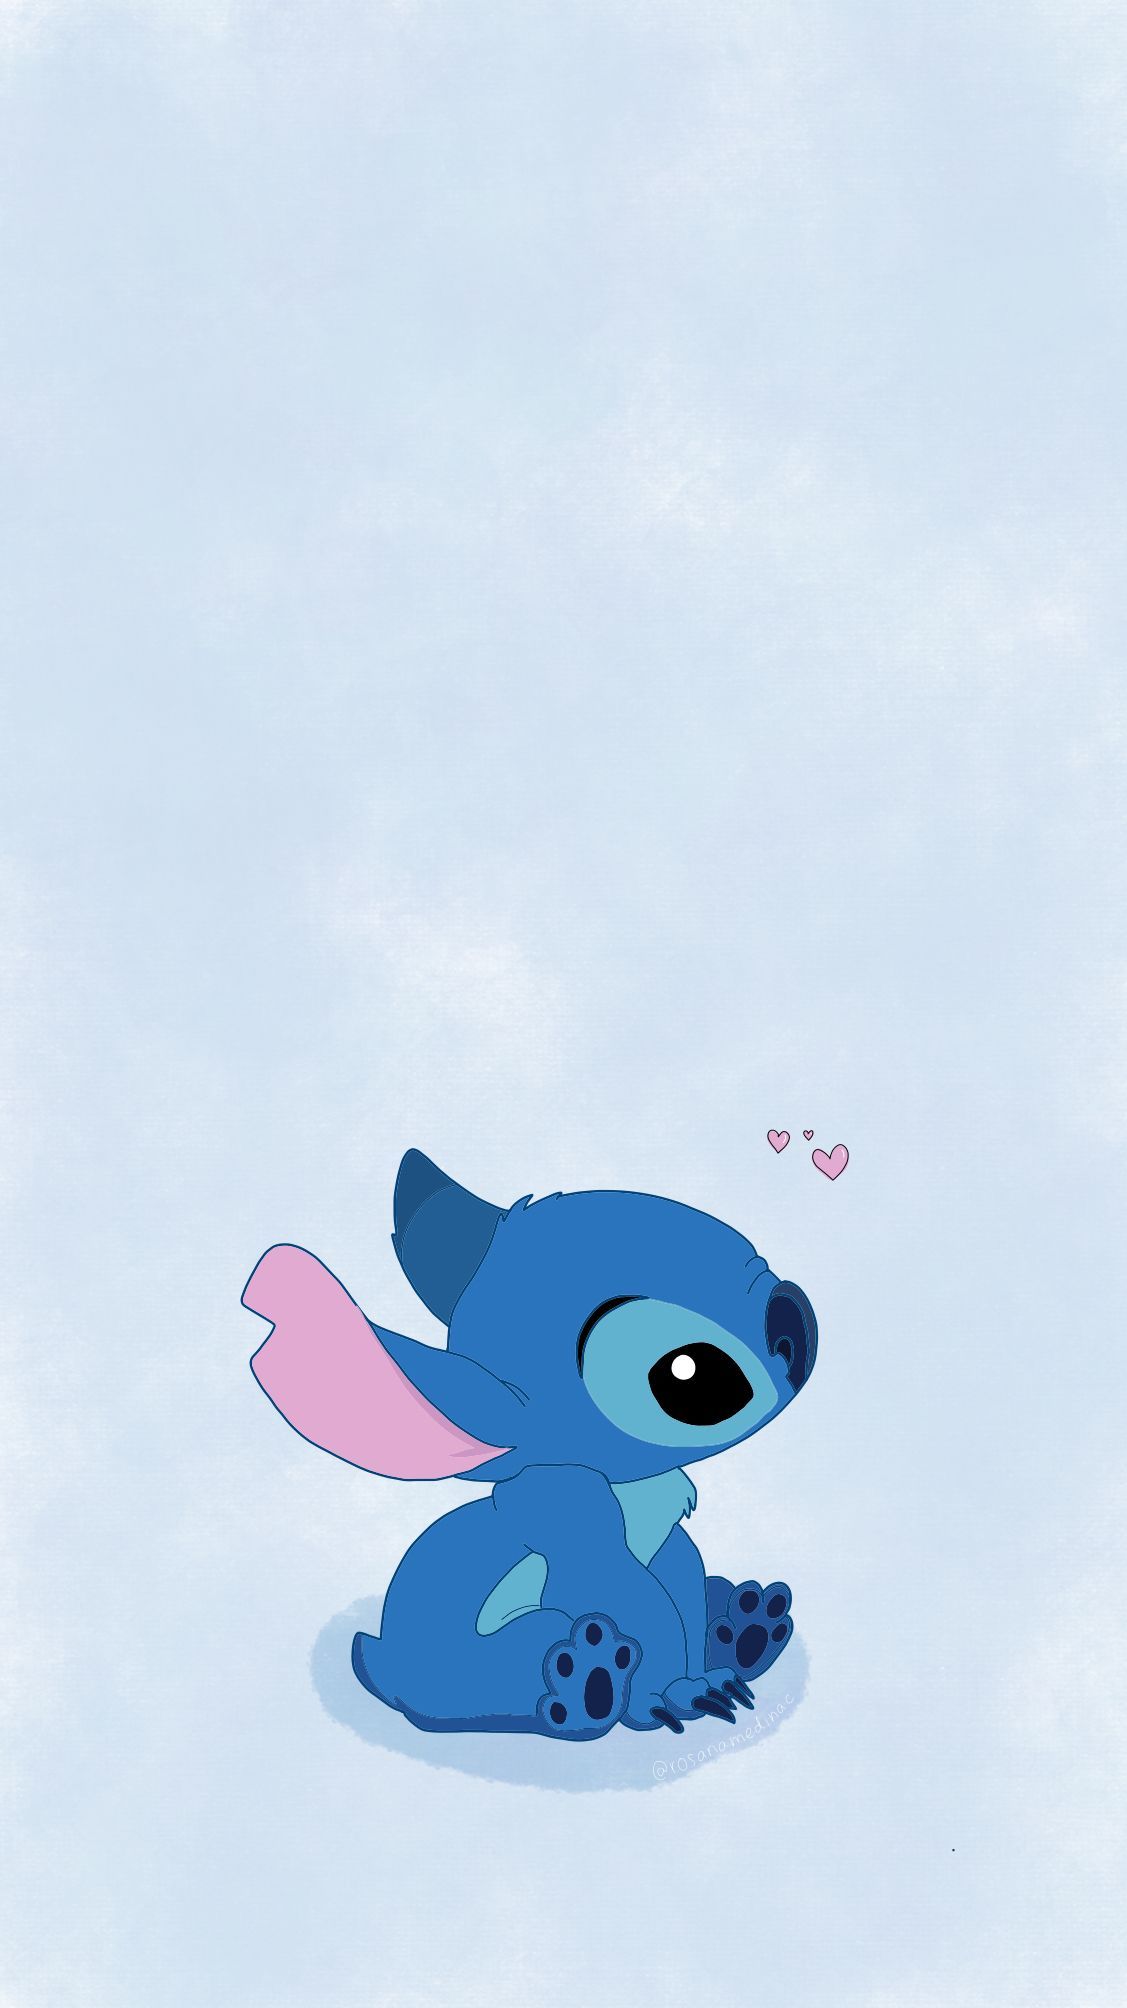 Background Stitch Aesthetic Wallpaper Discover more Character, Disney, Fictional, Ko. Cute disney wallpaper, Disney characters wallpaper, Lilo and stitch drawings